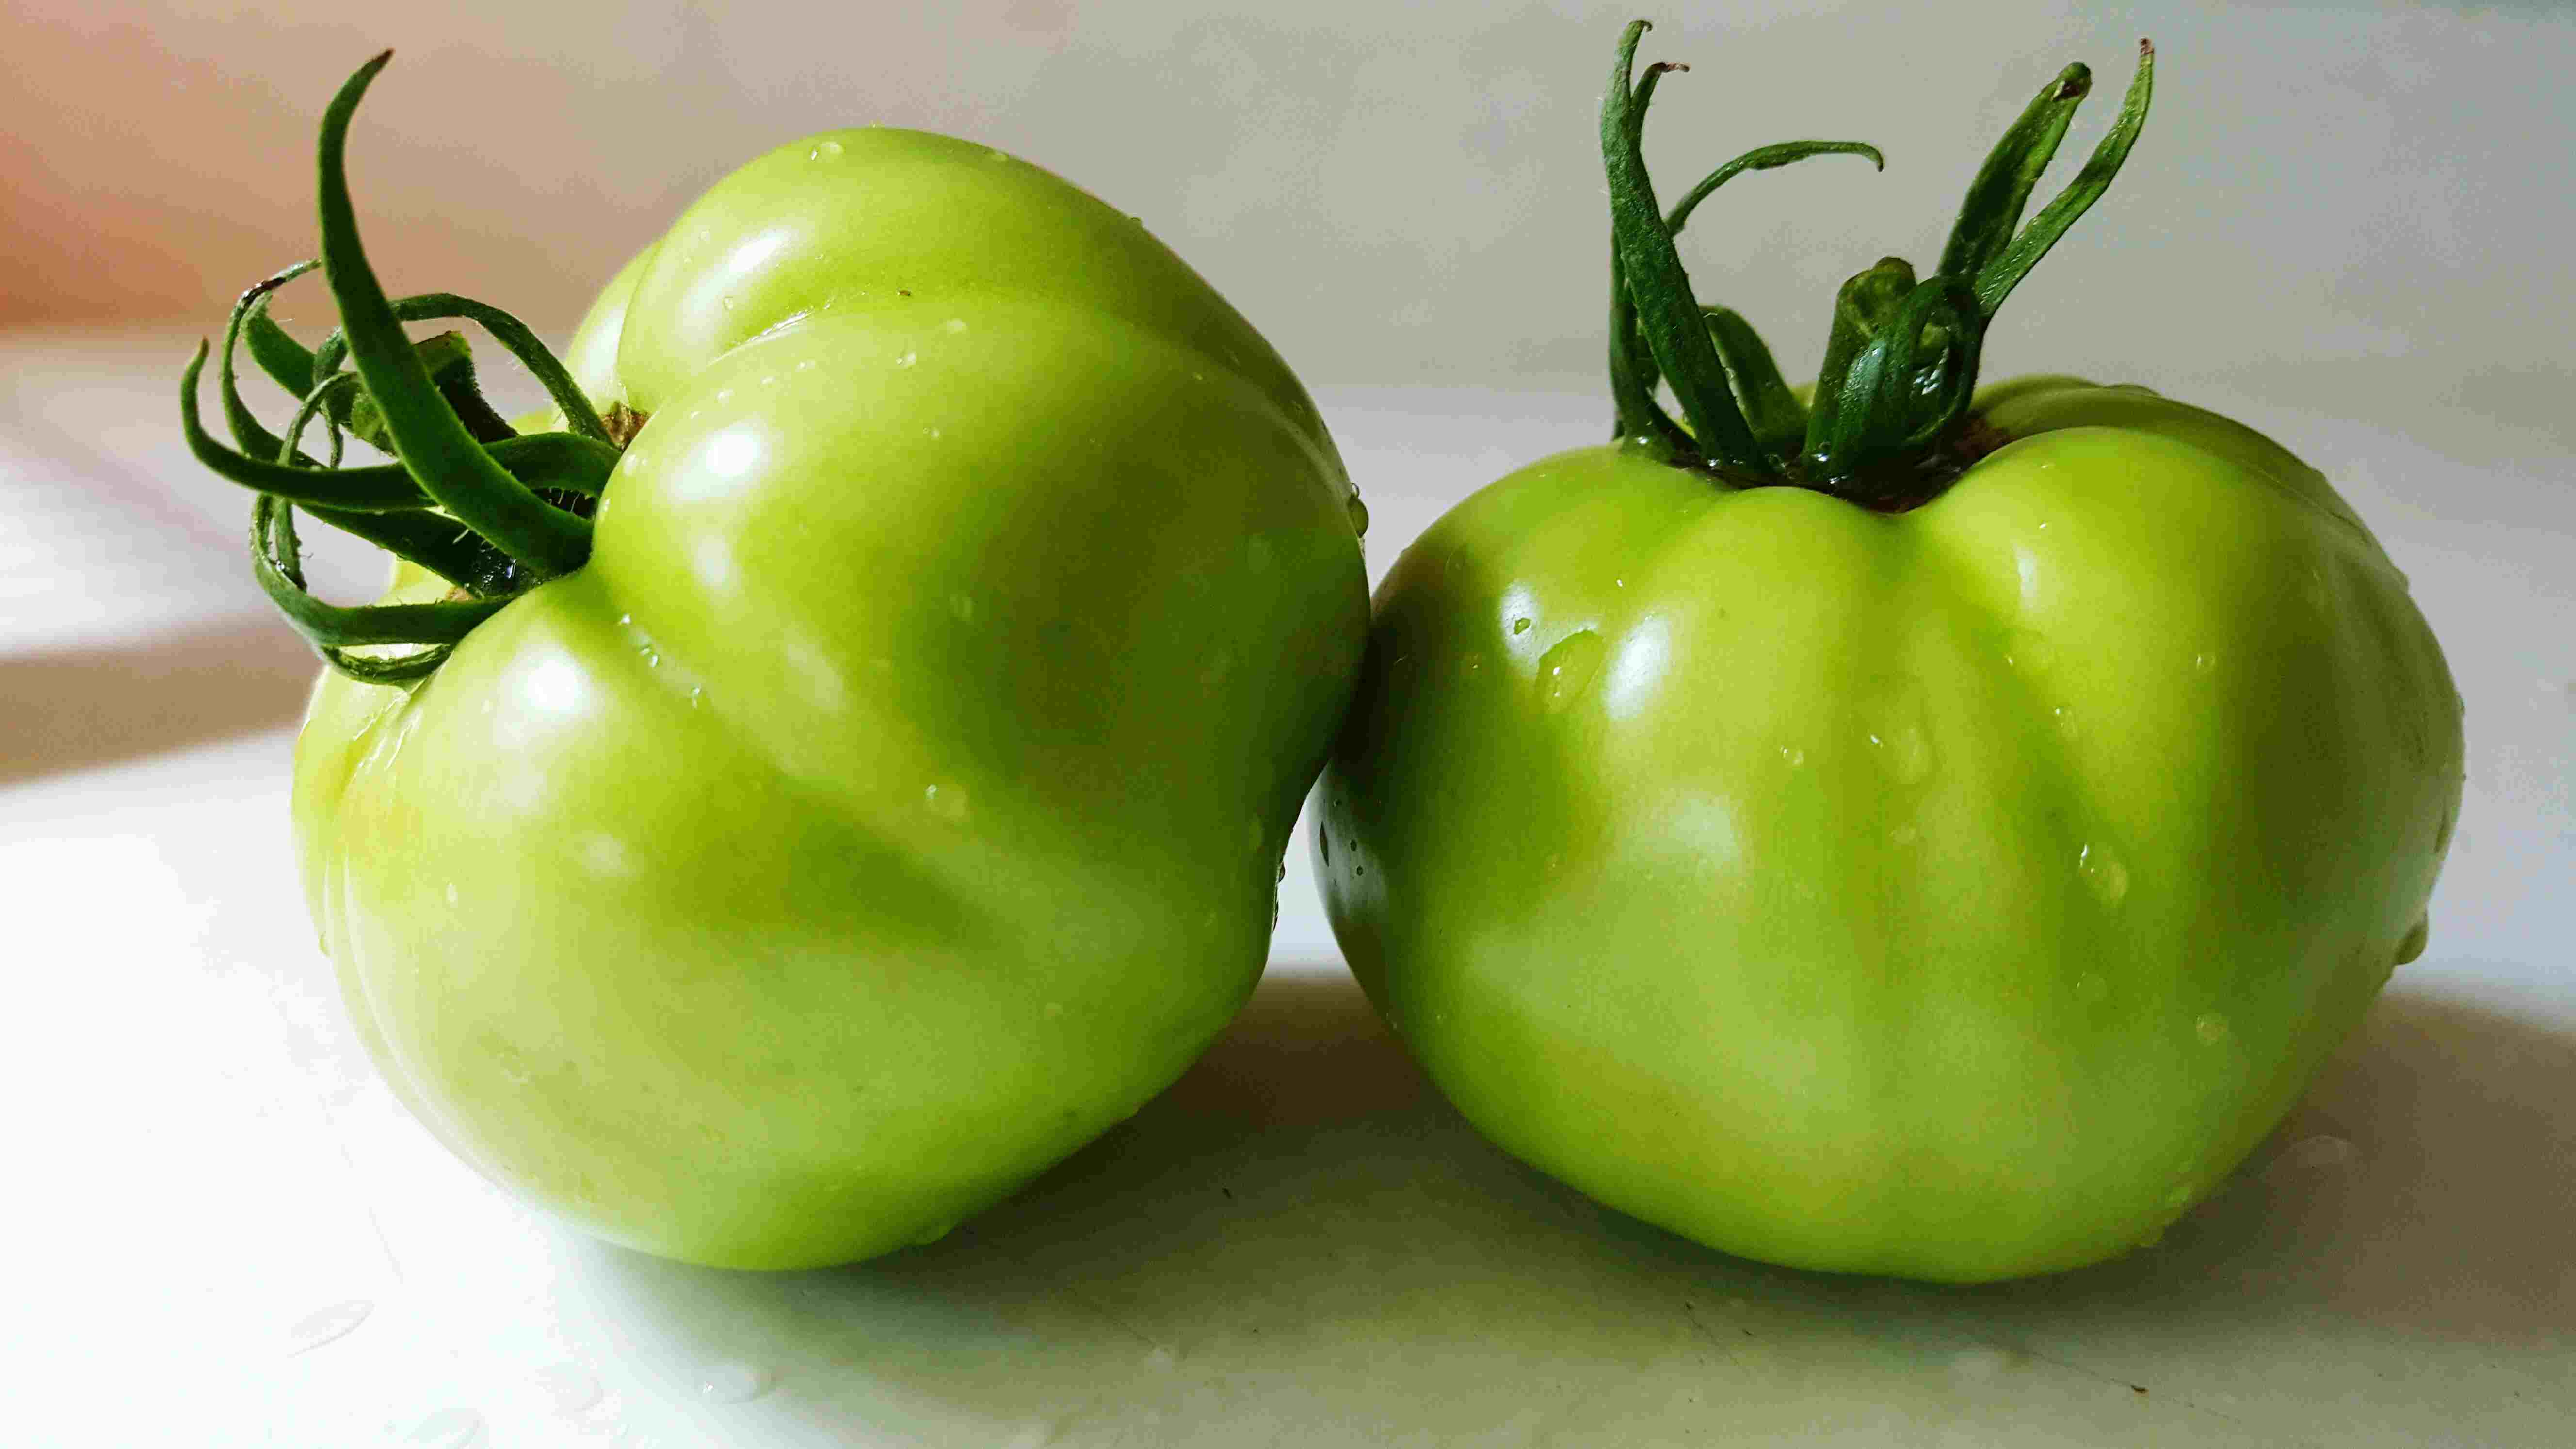 Baked Green Tomatoes Recipe